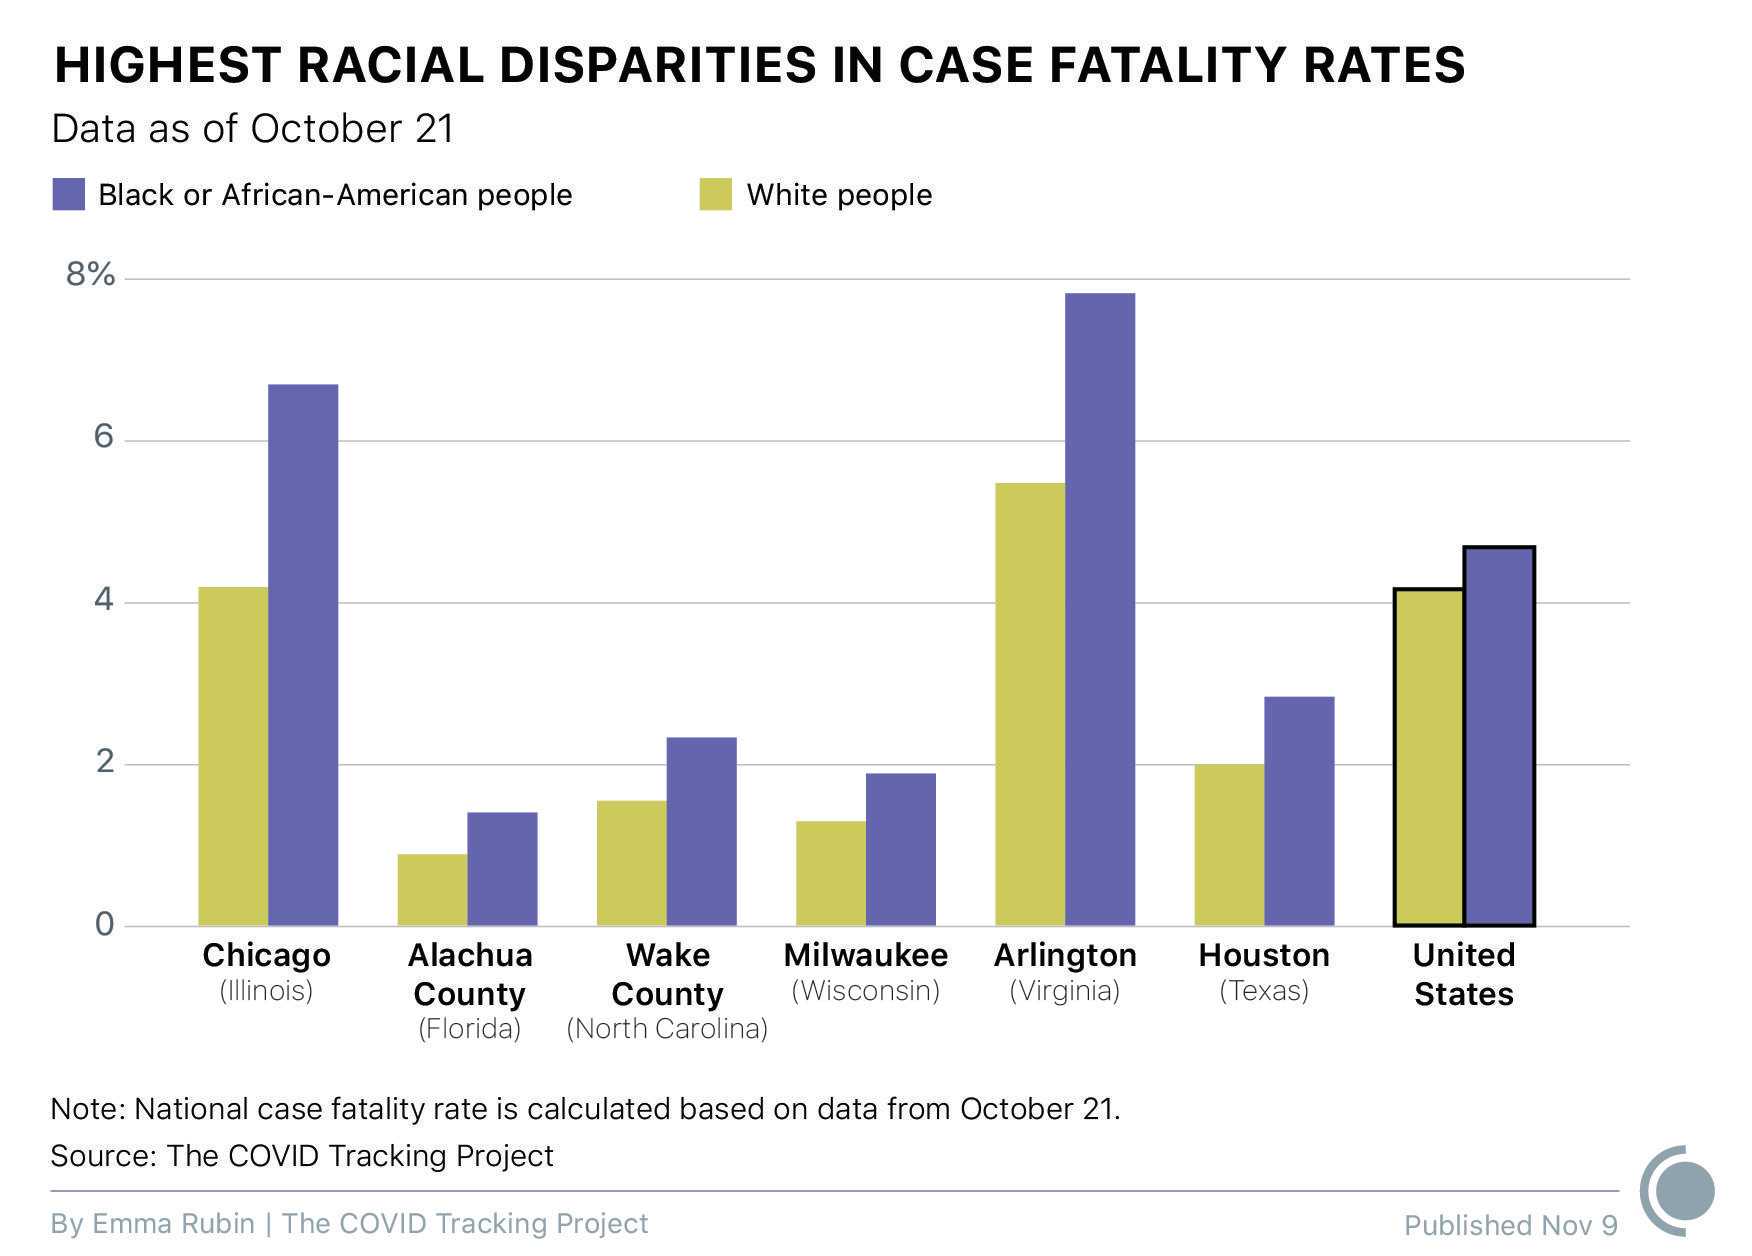 A double bar graph compares the case fatality rates among Black and African American people vs. White people for the following locations: Chicago, Illinois; Alachua County in Florida; Wake County in North Carolina; Milwaukee, Wisconsin; Arlington, Virginia; Houston, Texas; and the entire United States. For all locations listed, Black and African American people have a higher case fatality rate than White people. All data is as of October 21.